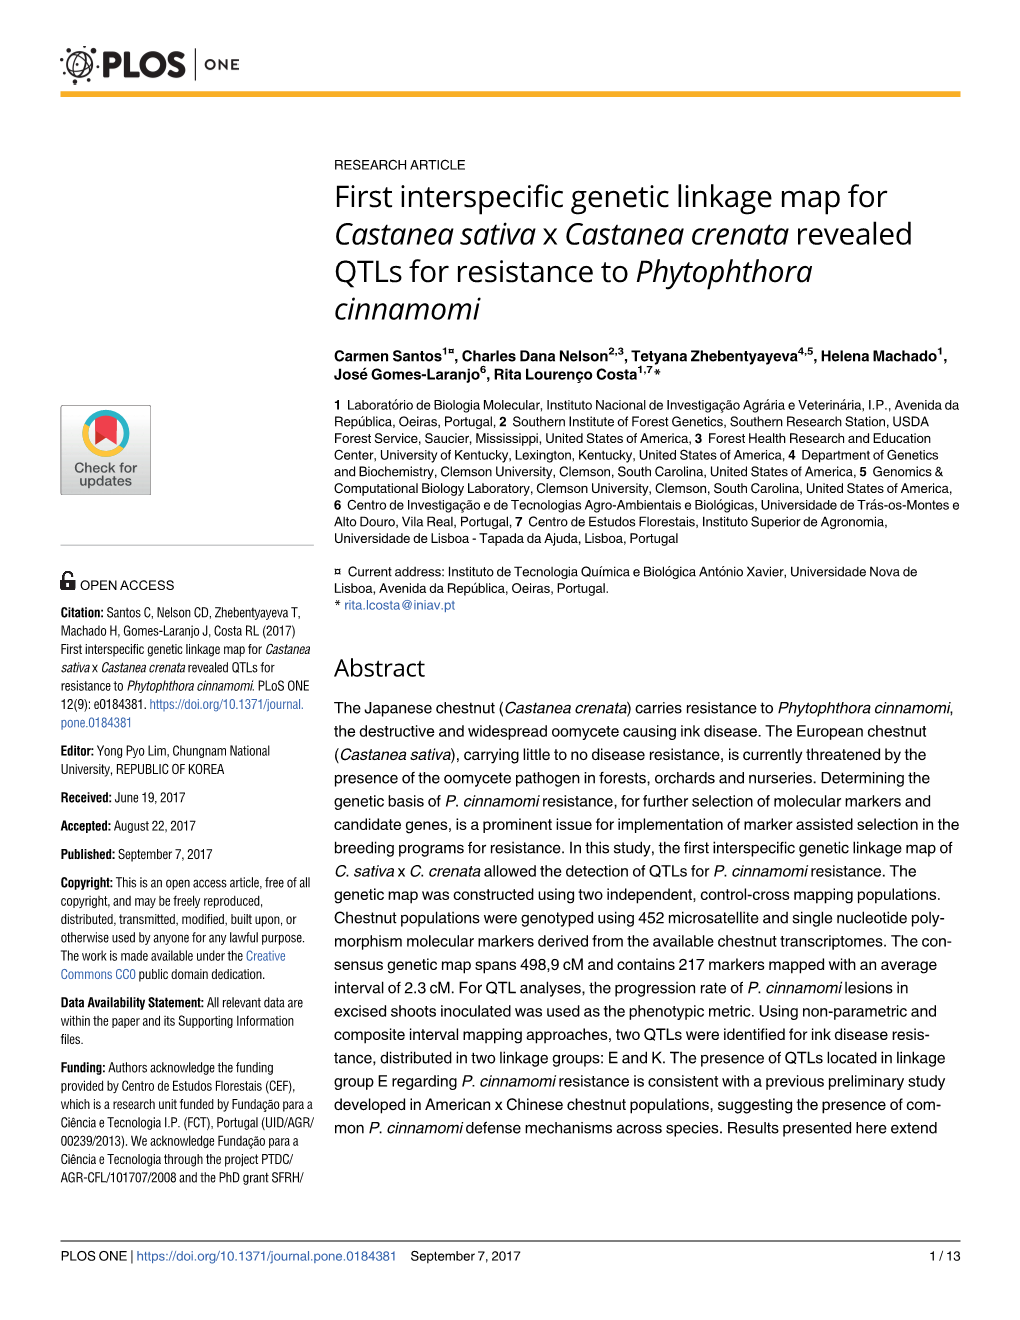 First Interspecific Genetic Linkage Map for Castanea Sativa X Castanea Crenata Revealed Qtls for Resistance to Phytophthora Cinnamomi